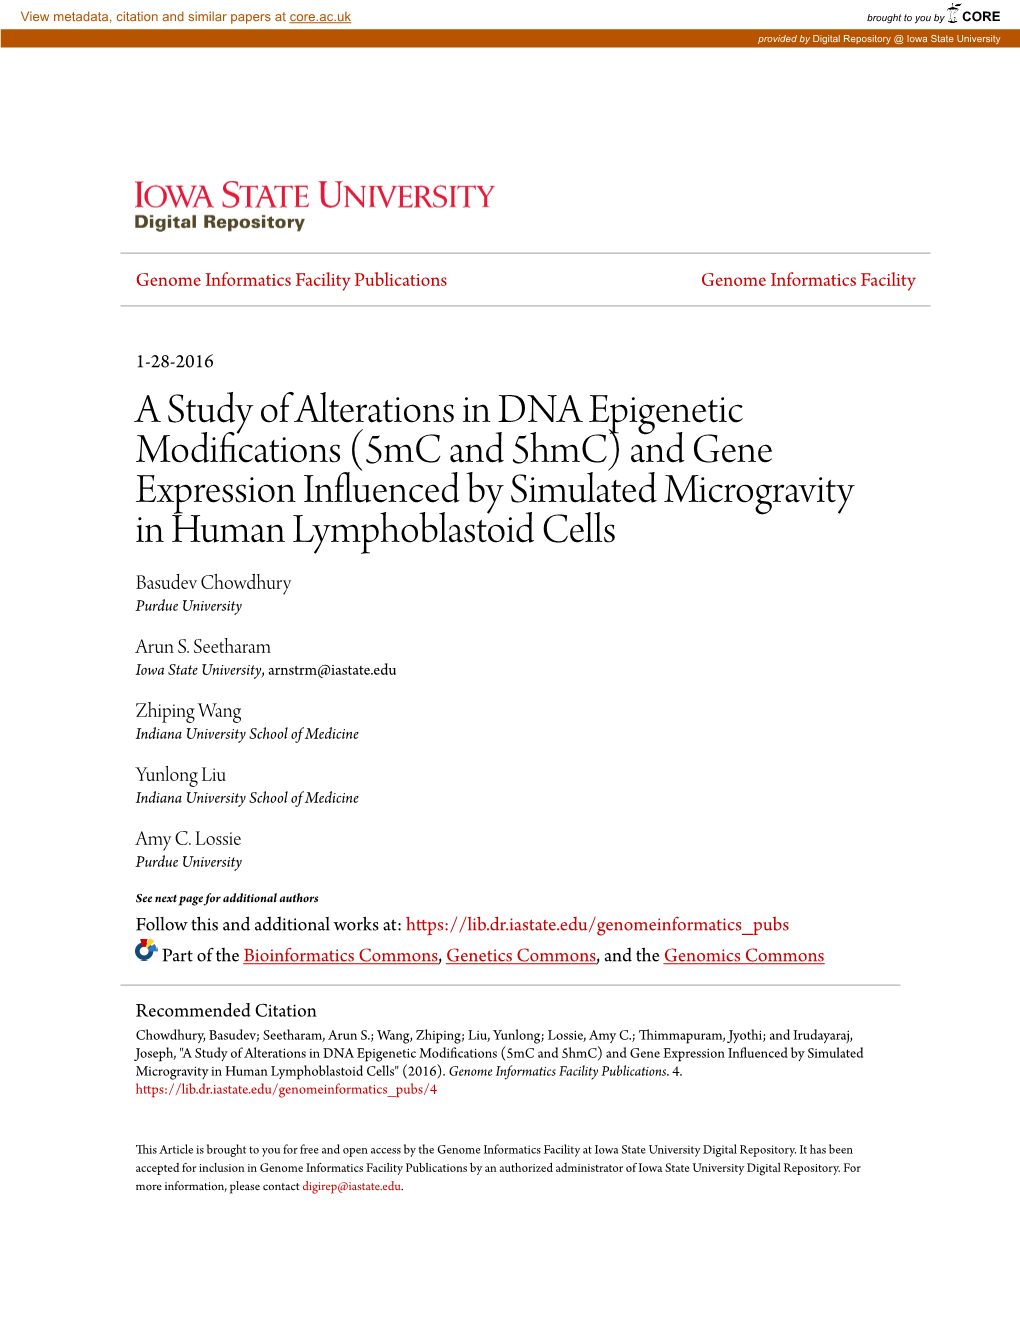 A Study of Alterations in DNA Epigenetic Modifications (5Mc and 5Hmc) and Gene Expression Influenced by Simulated Microgravity I